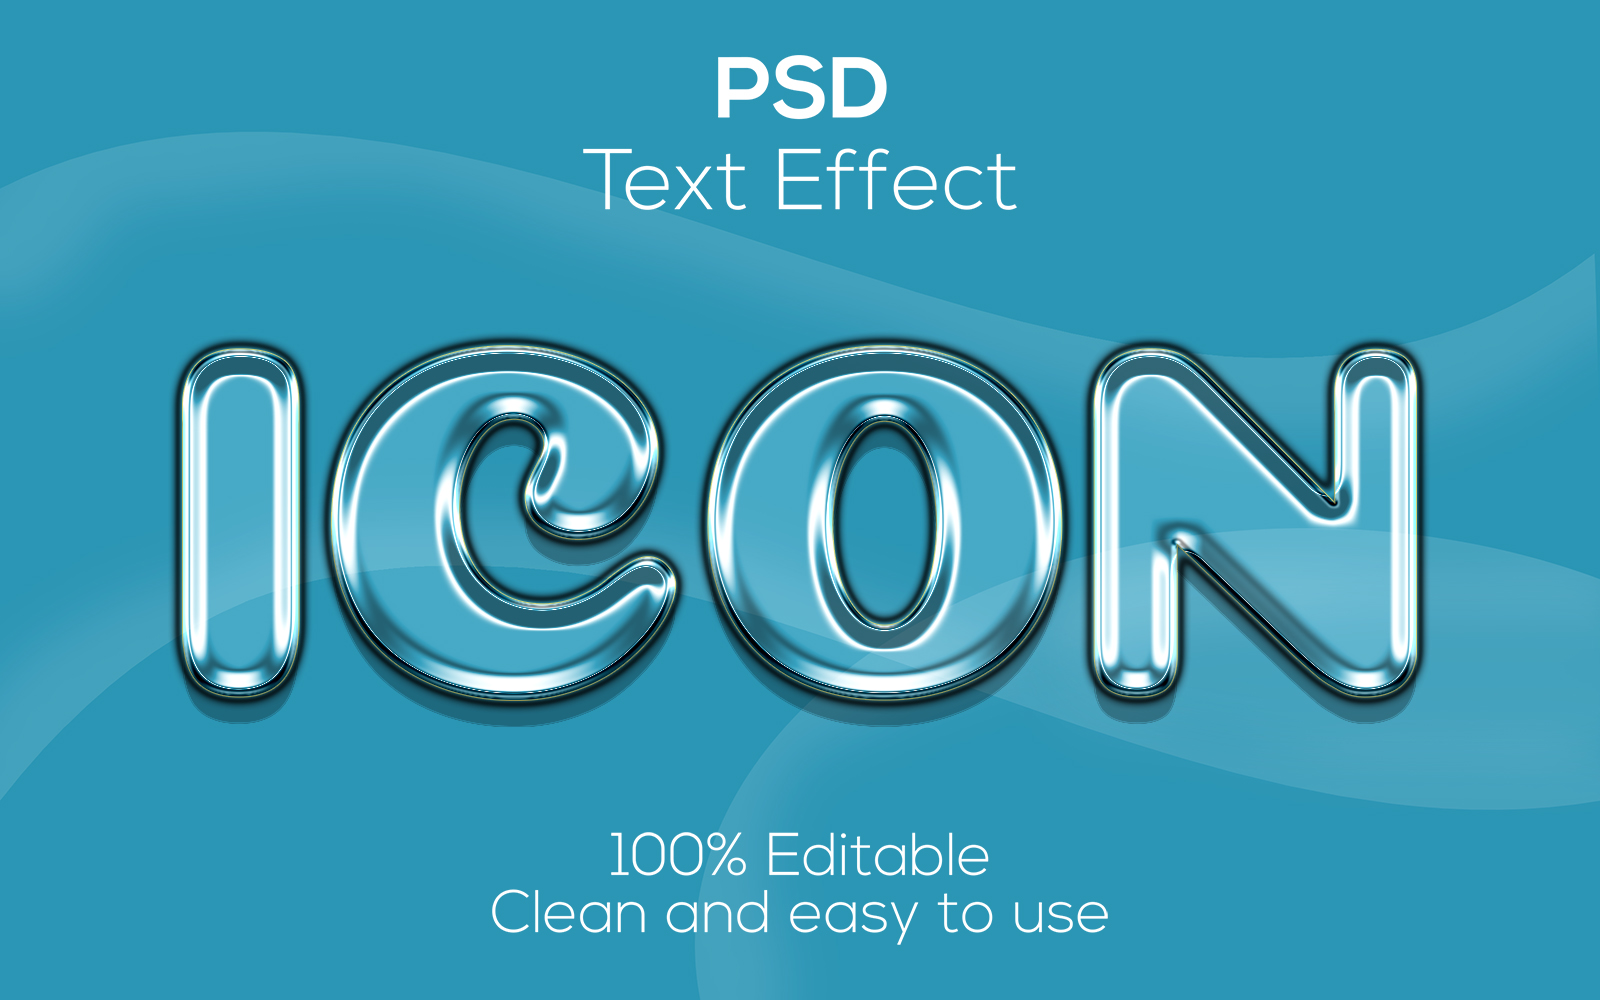 Icon | Icon Editable Psd Text Glass Effect | Modern Icon Psd Text Glass Effect